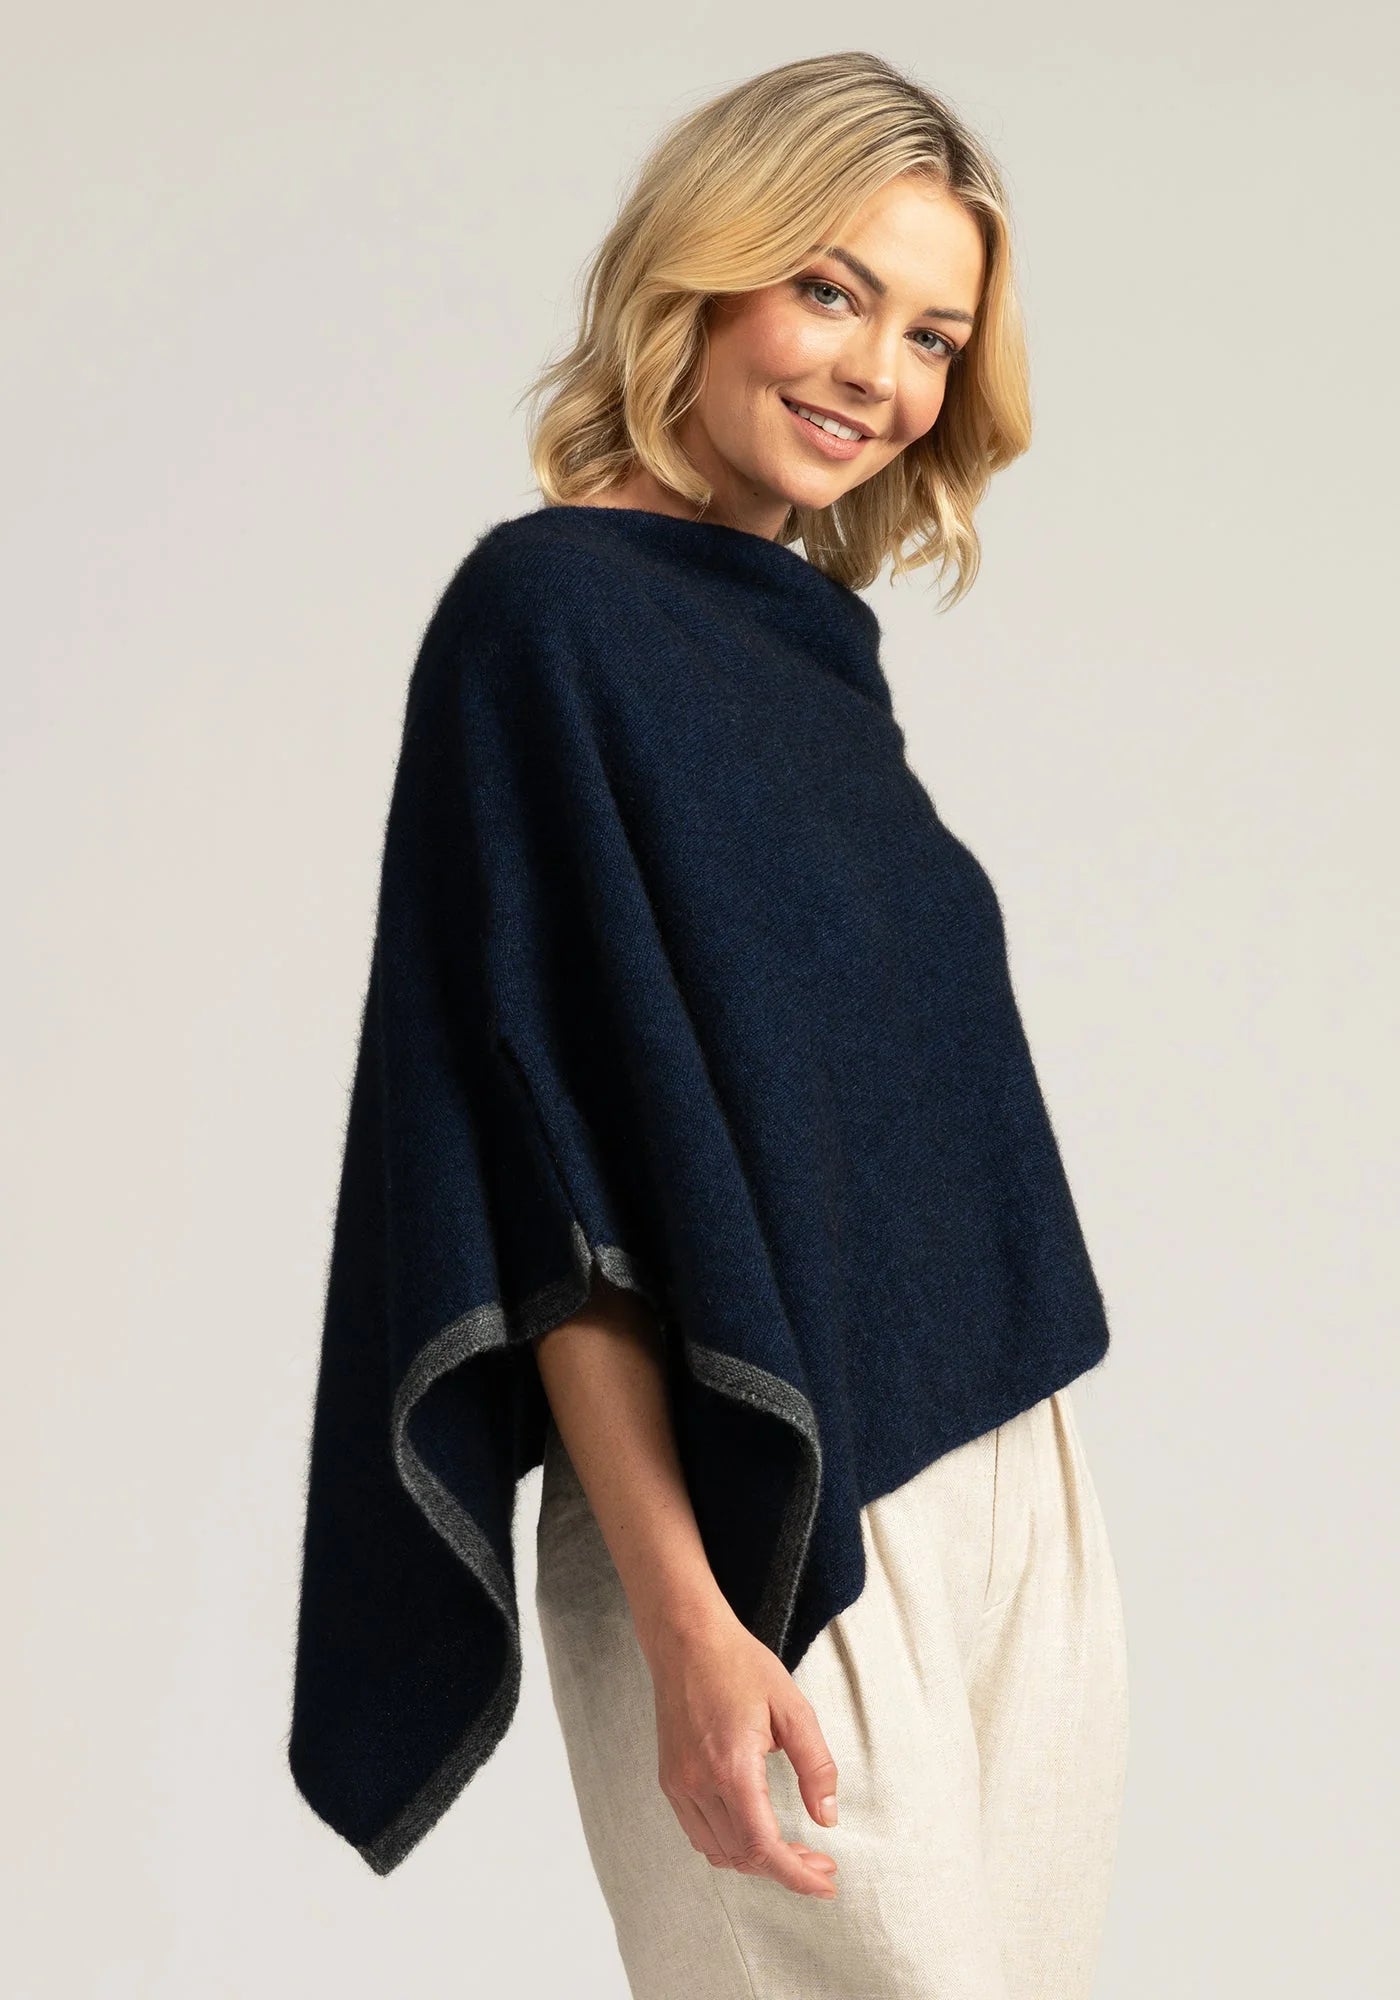 Stay cozy in style with our navy blue merino wool poncho. Luxurious warmth meets timeless elegance. Shop now!